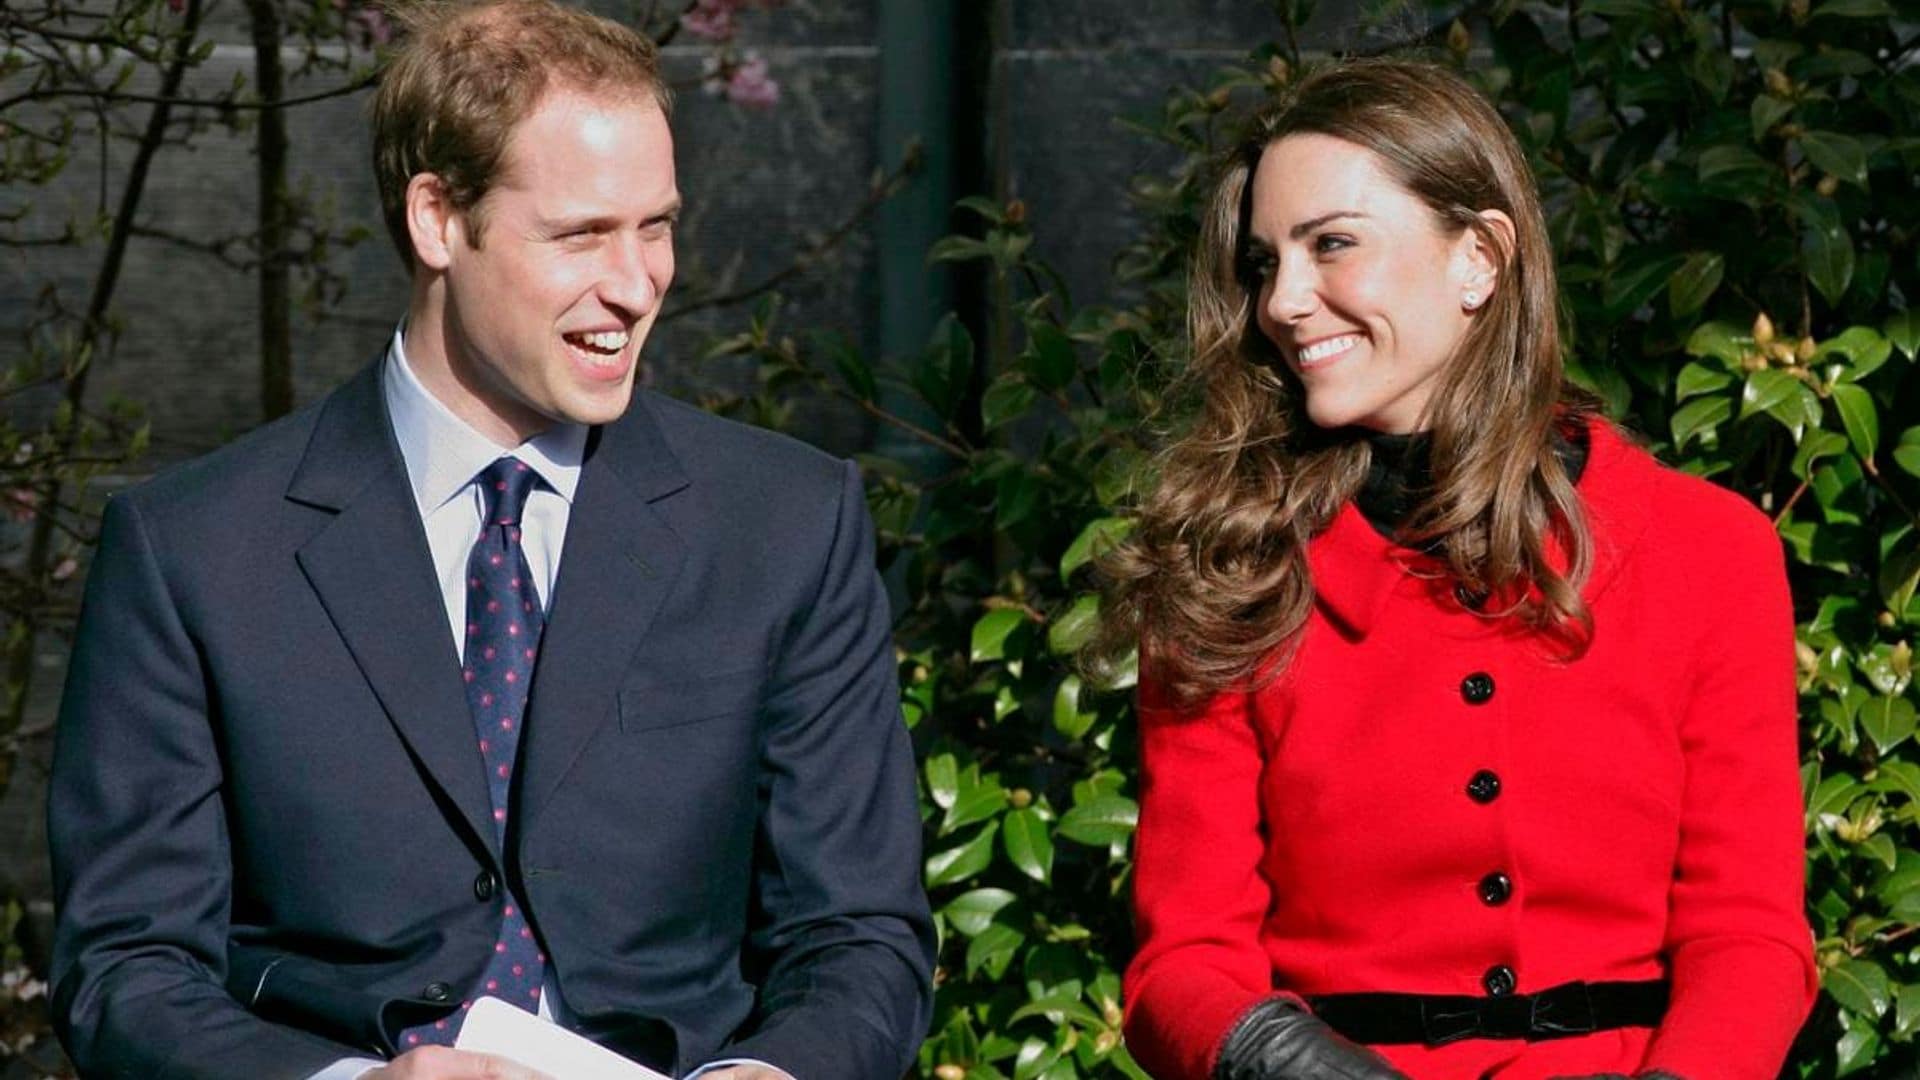 Find out who is going to play Prince William and Kate on 'The Crown'